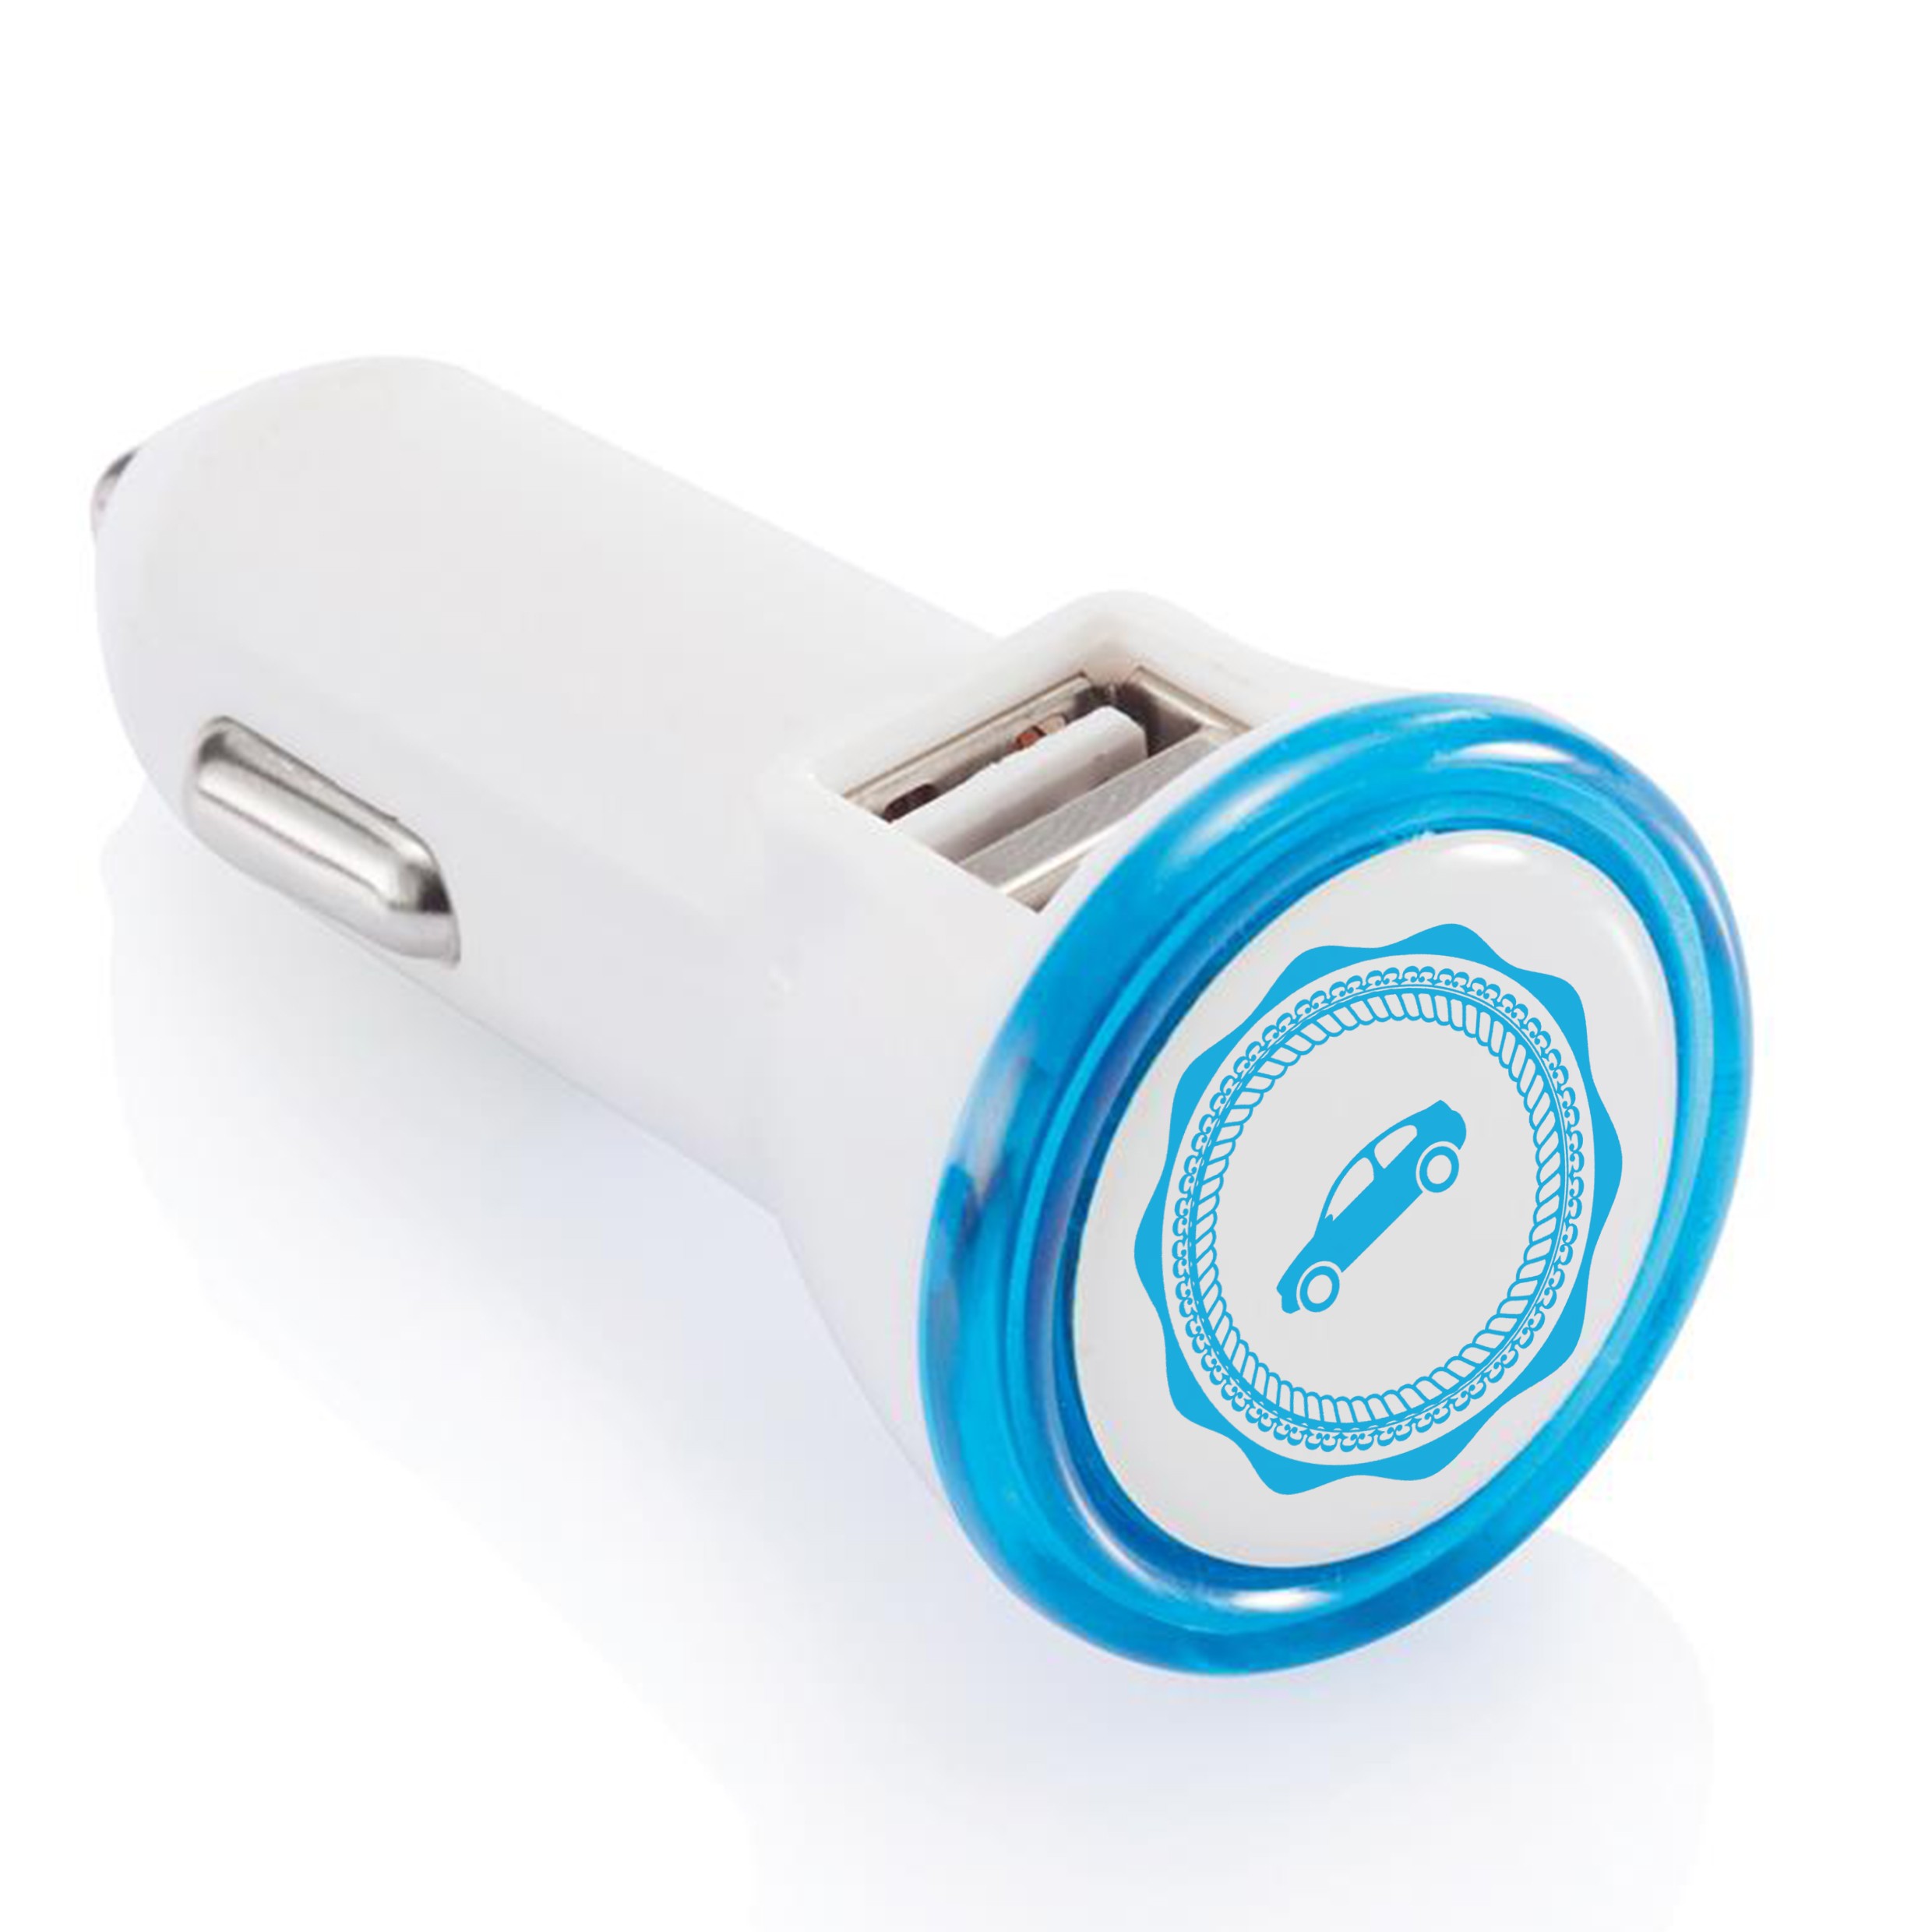 Portable Double USB Connector with Integrated LED Light - Zouch